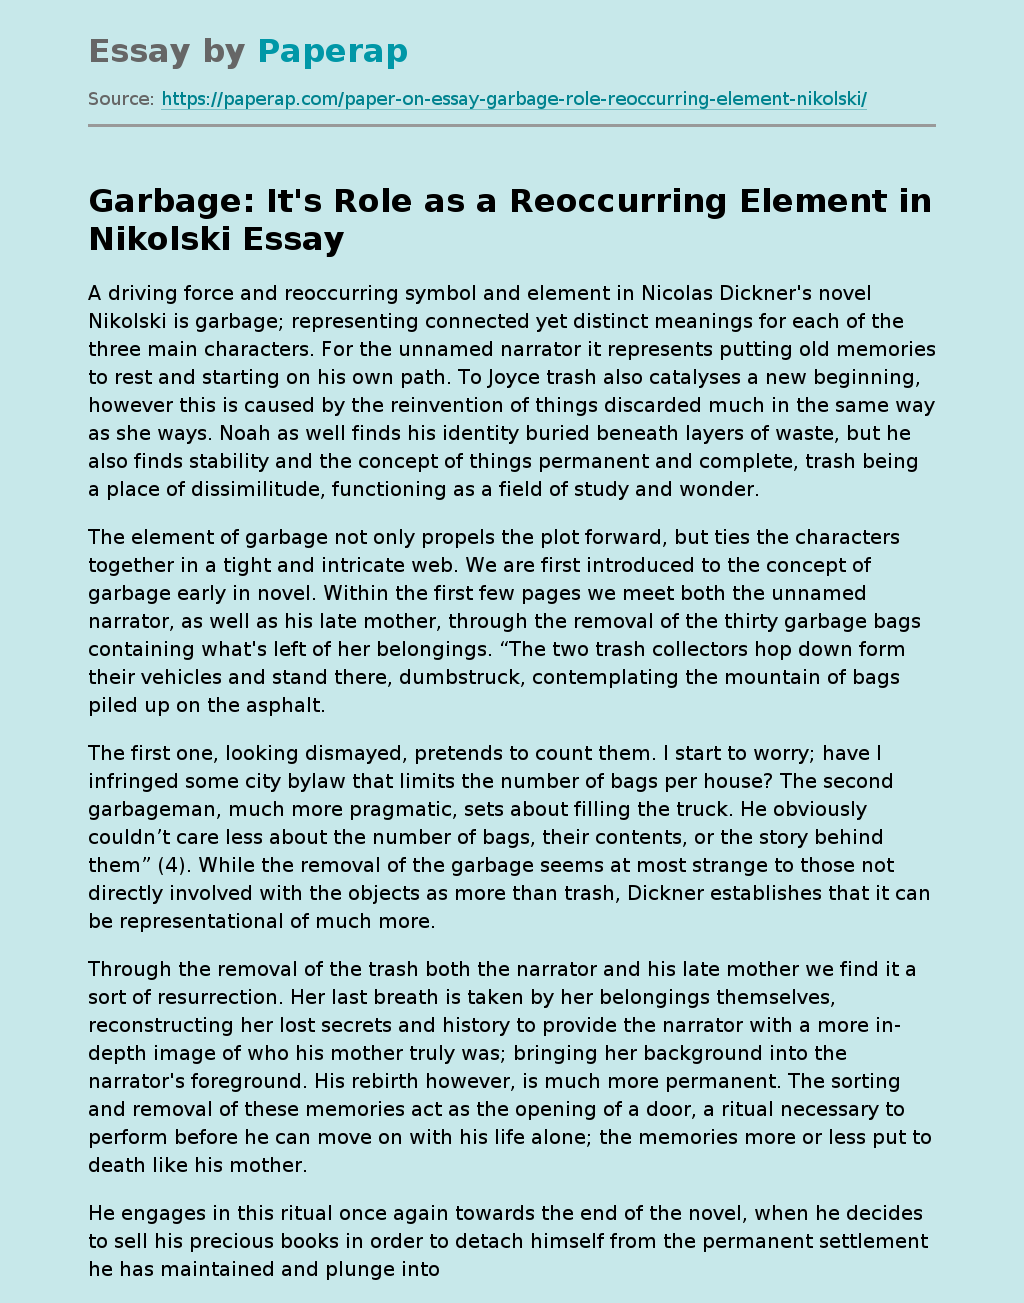 Garbage: It's Role as a Reoccurring Element in Nikolski